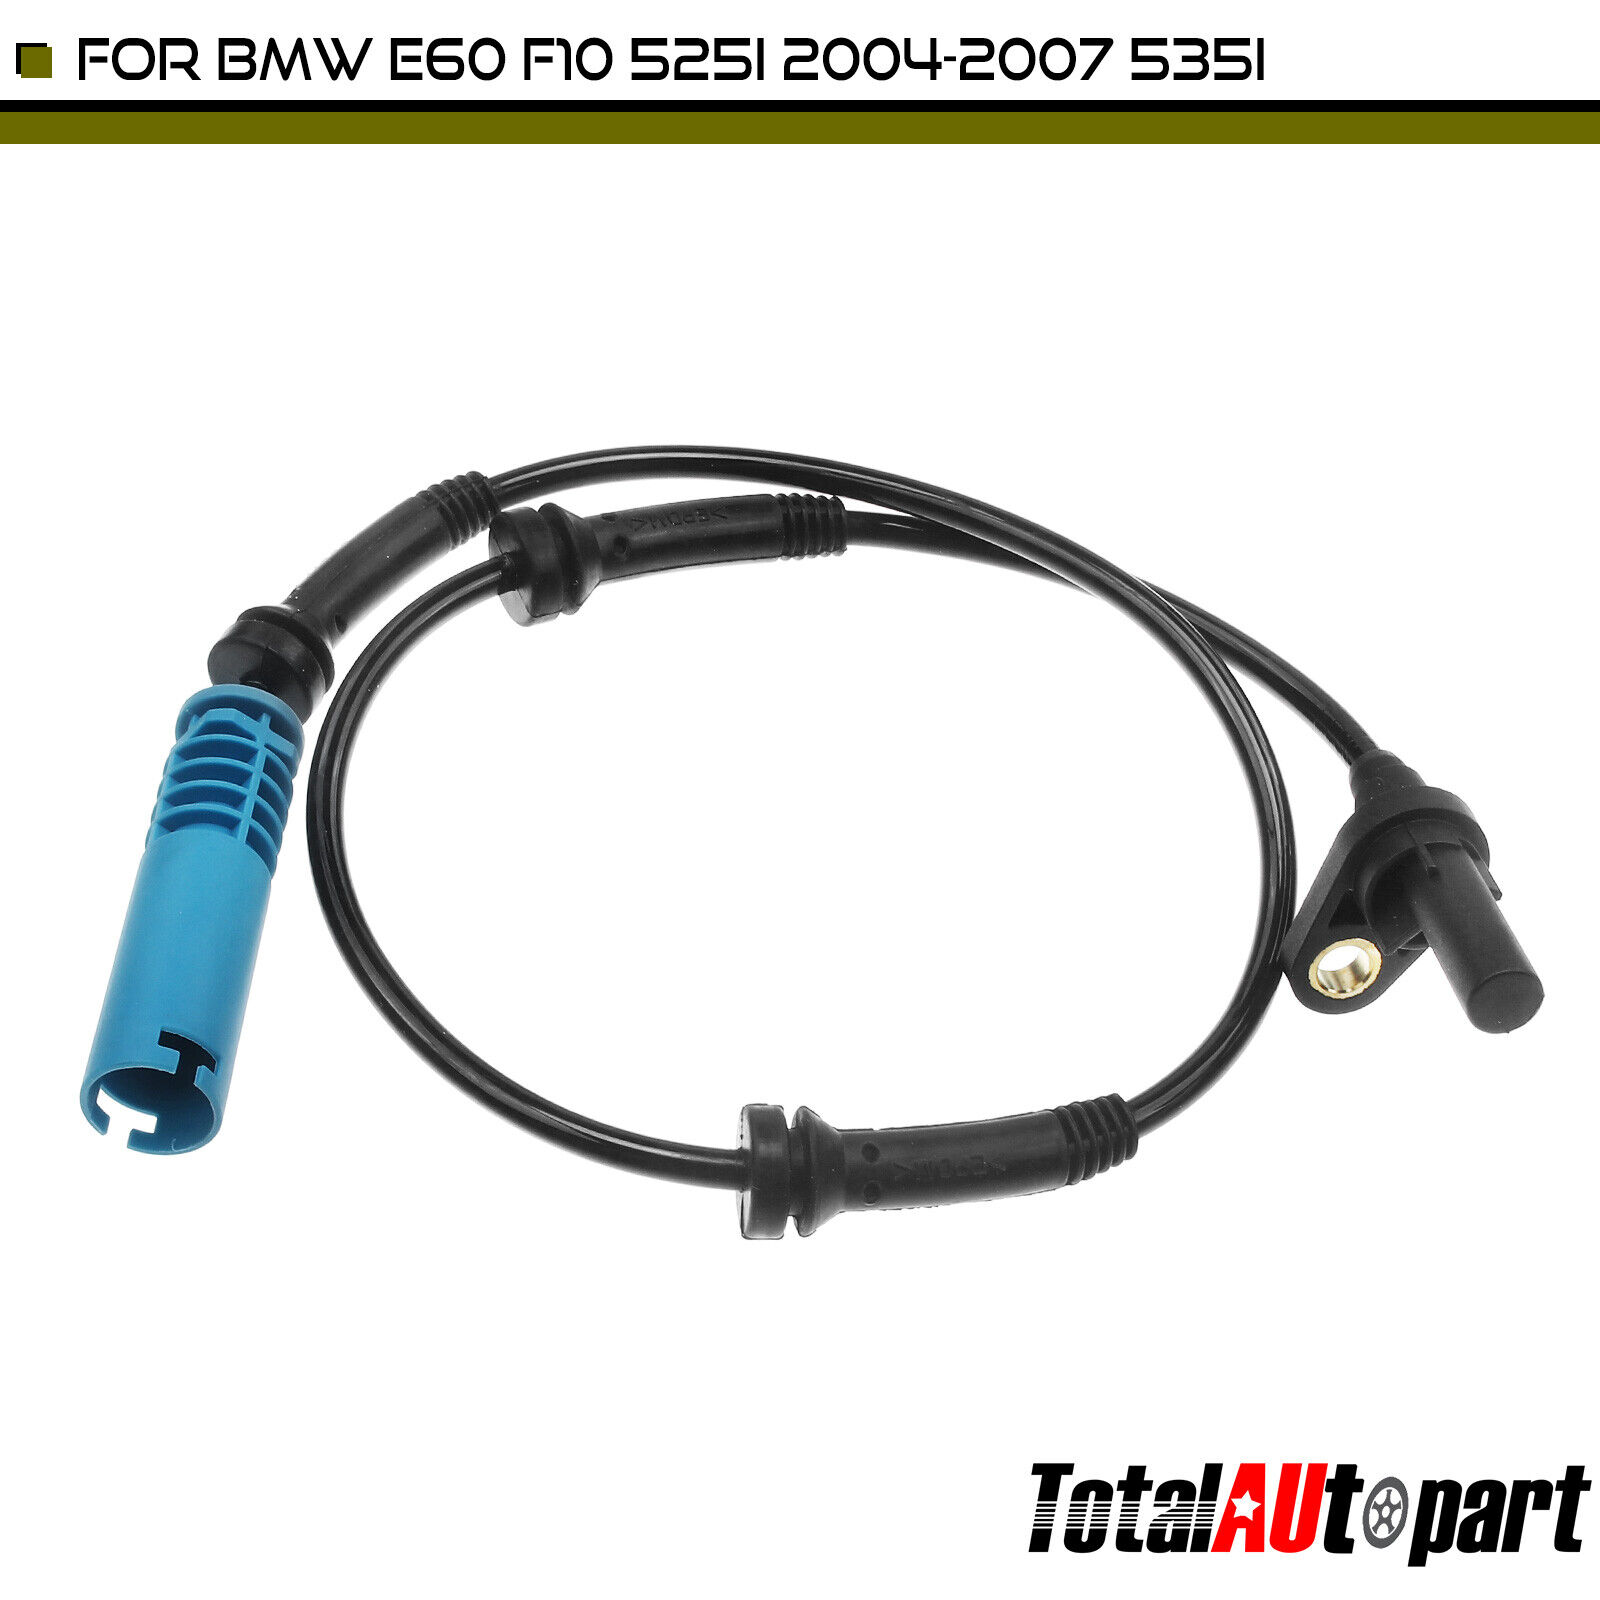 New 1Pc ABS Wheel Speed Sensor for BMW E60 F10 E63 525I 535I Front Left or Right